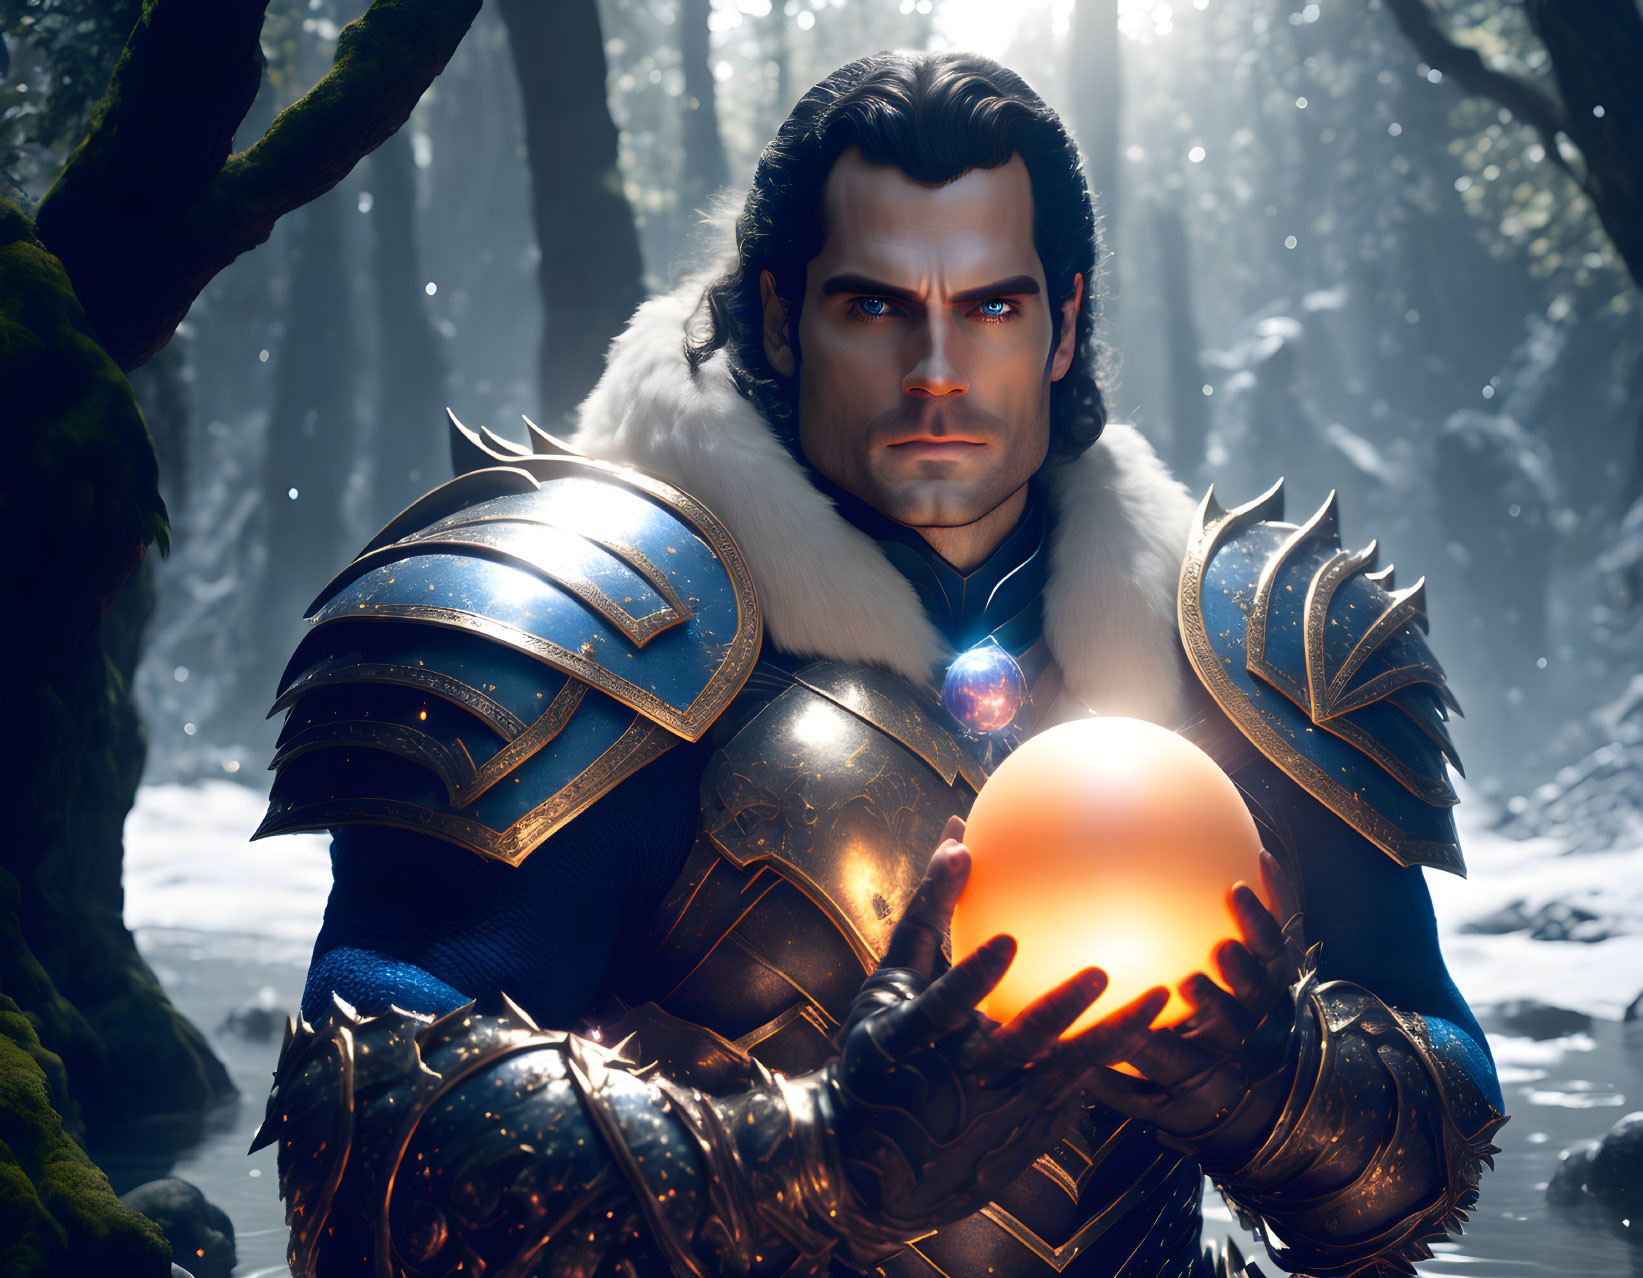 Knight in Blue Armor Holds Glowing Orb in Mystical Forest